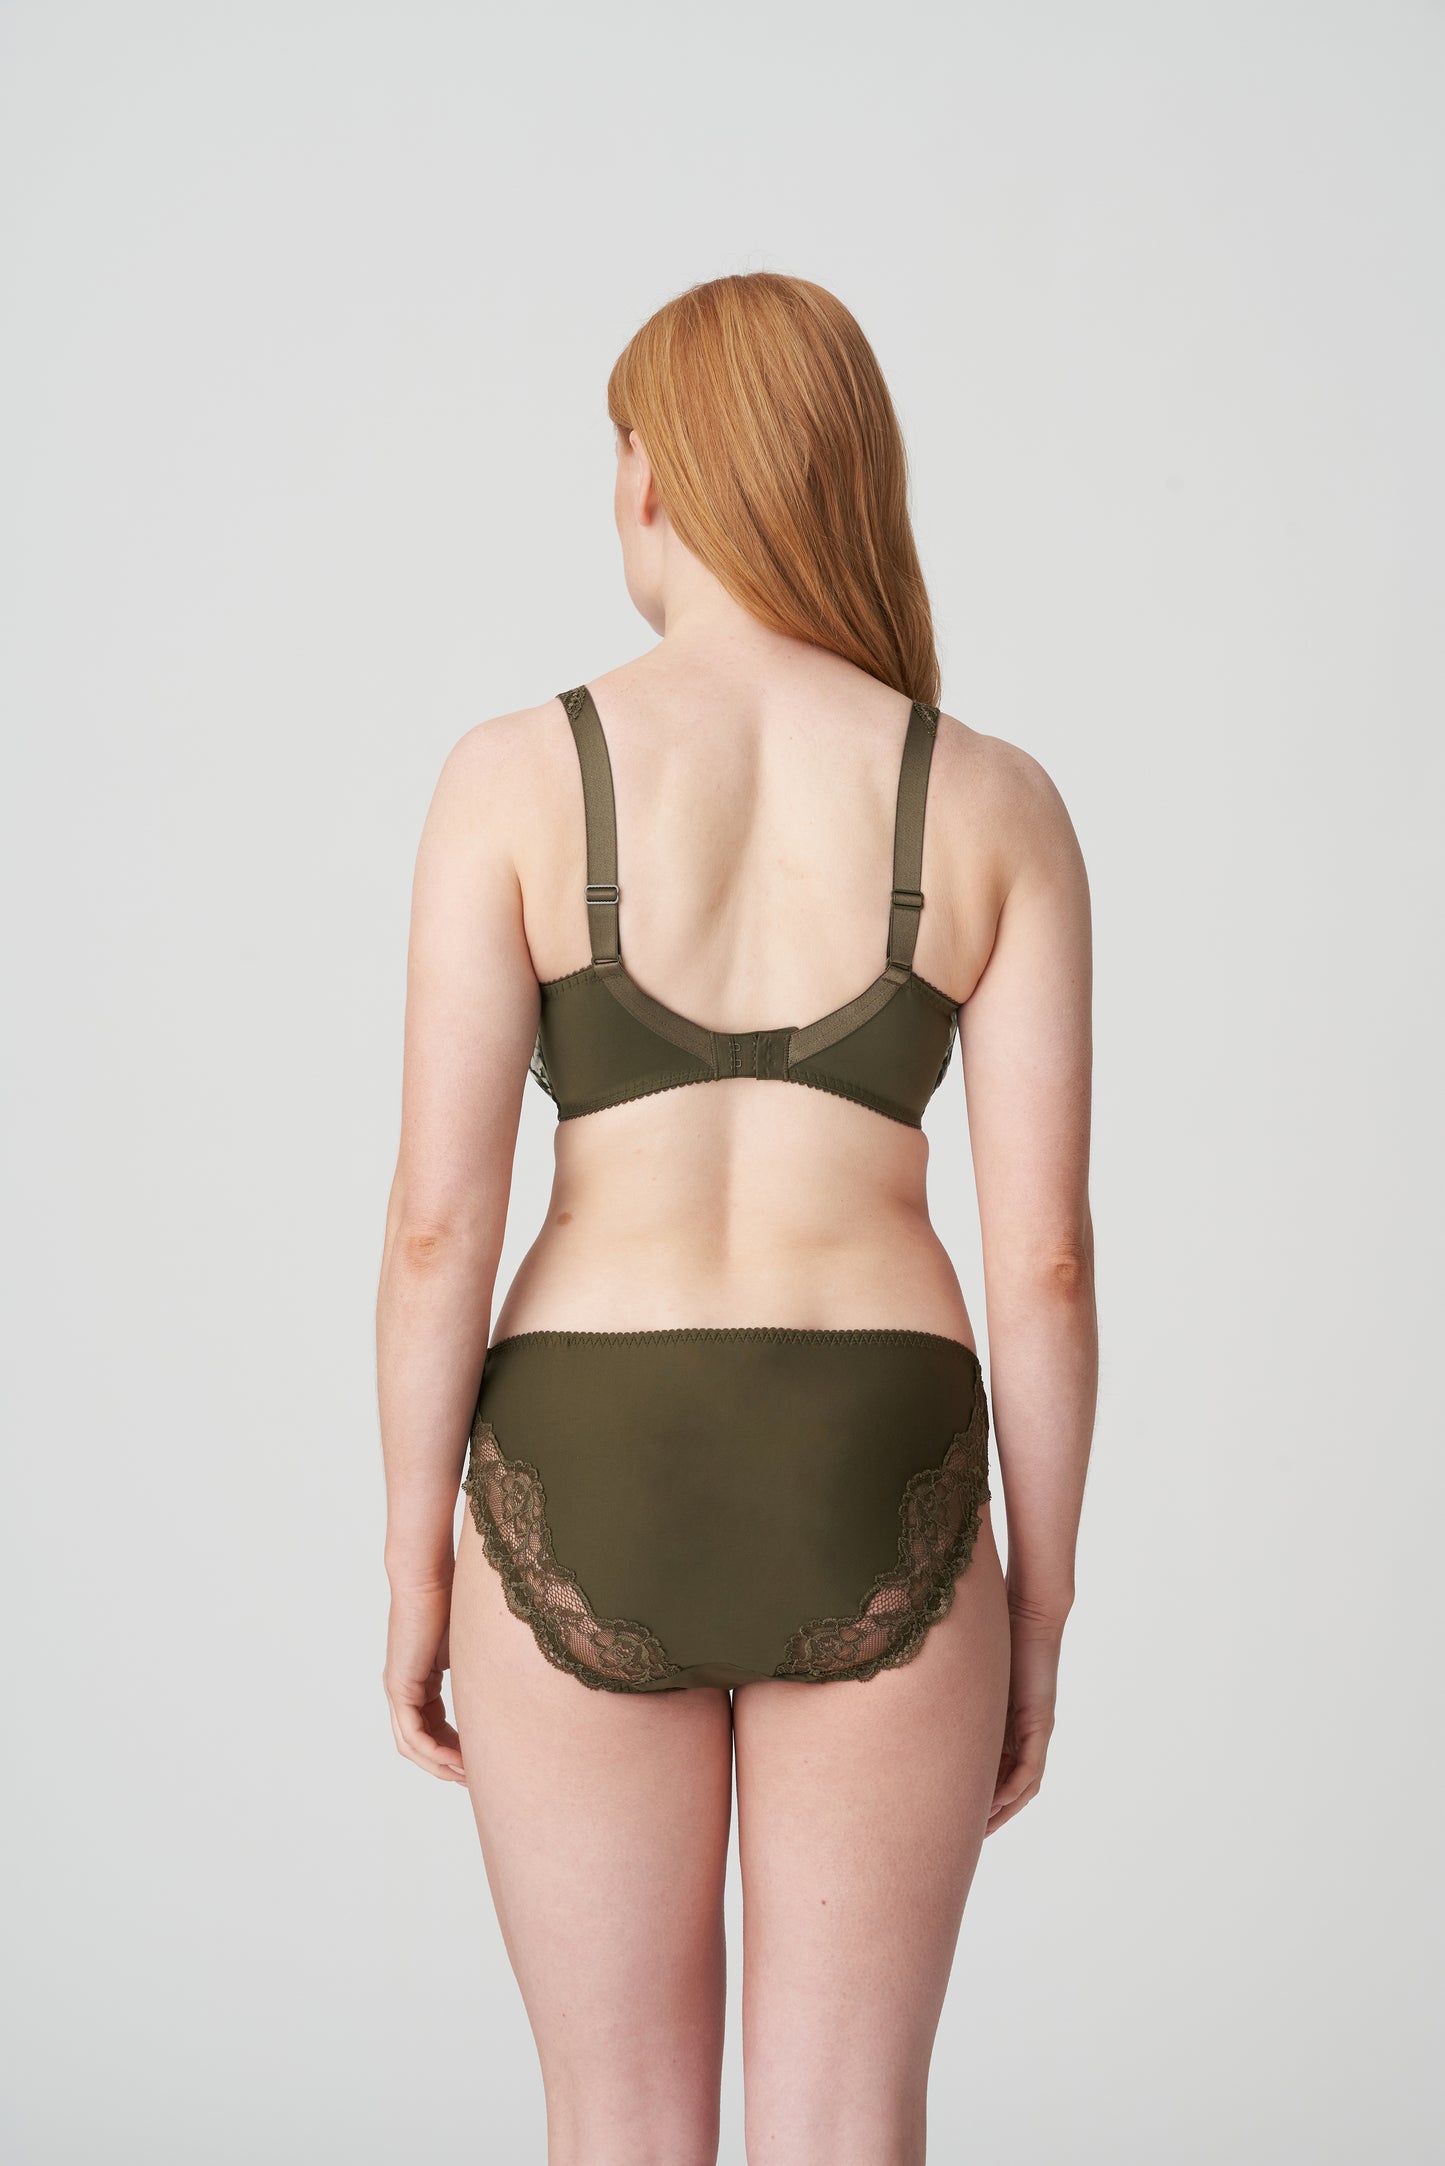 PrimaDonna Madison volle cup bh olive green